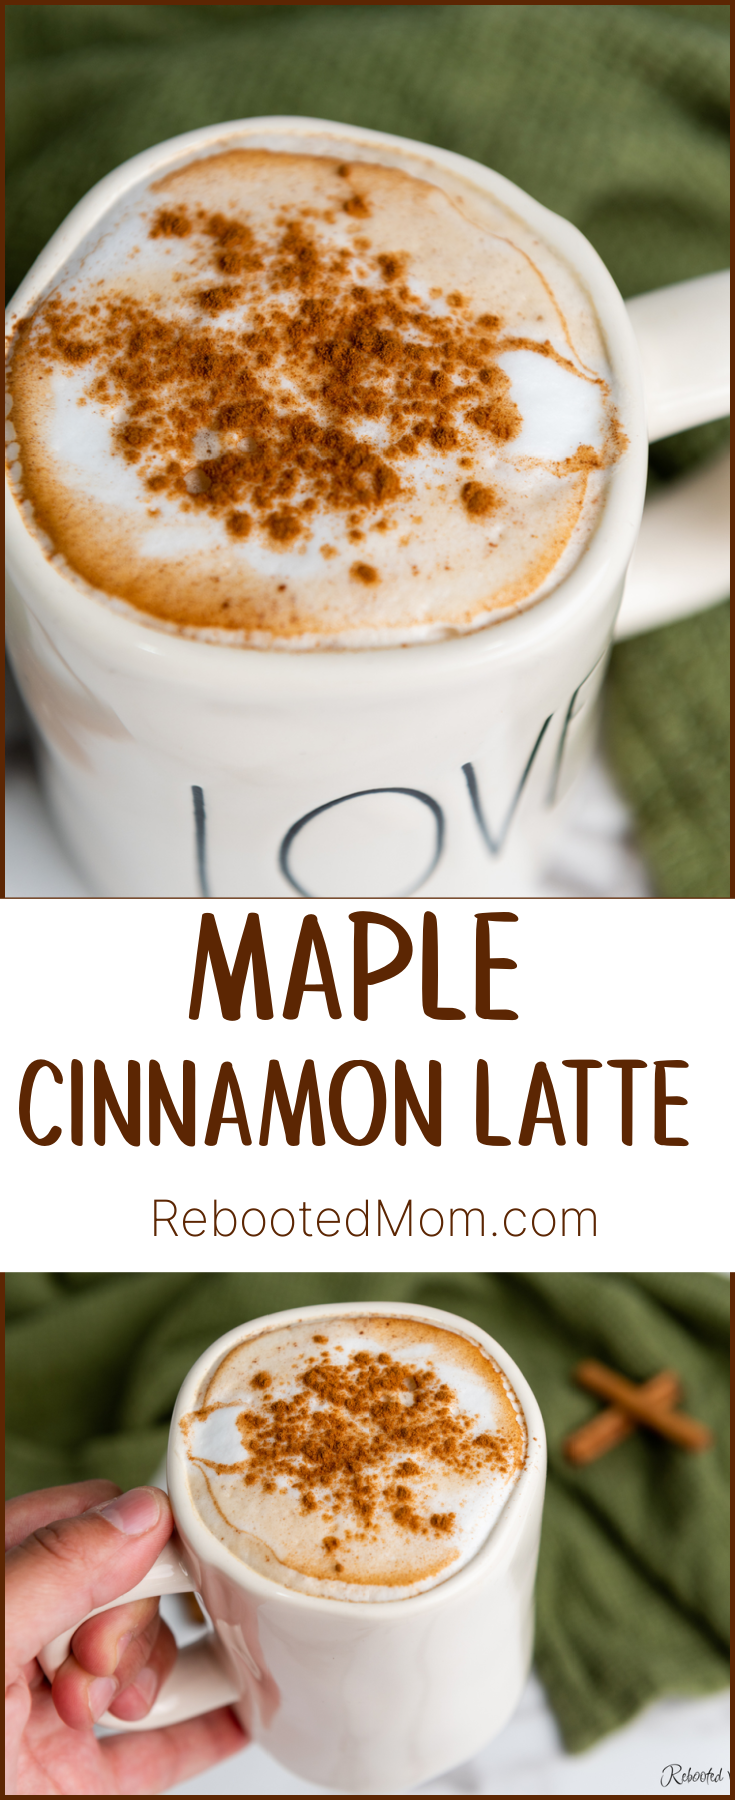 This Maple Cinnamon Latte combines all of your favorite fall flavors in a delicious drink that's cozy, warm, and super easy to put together - so good you'll want to enjoy this daily!